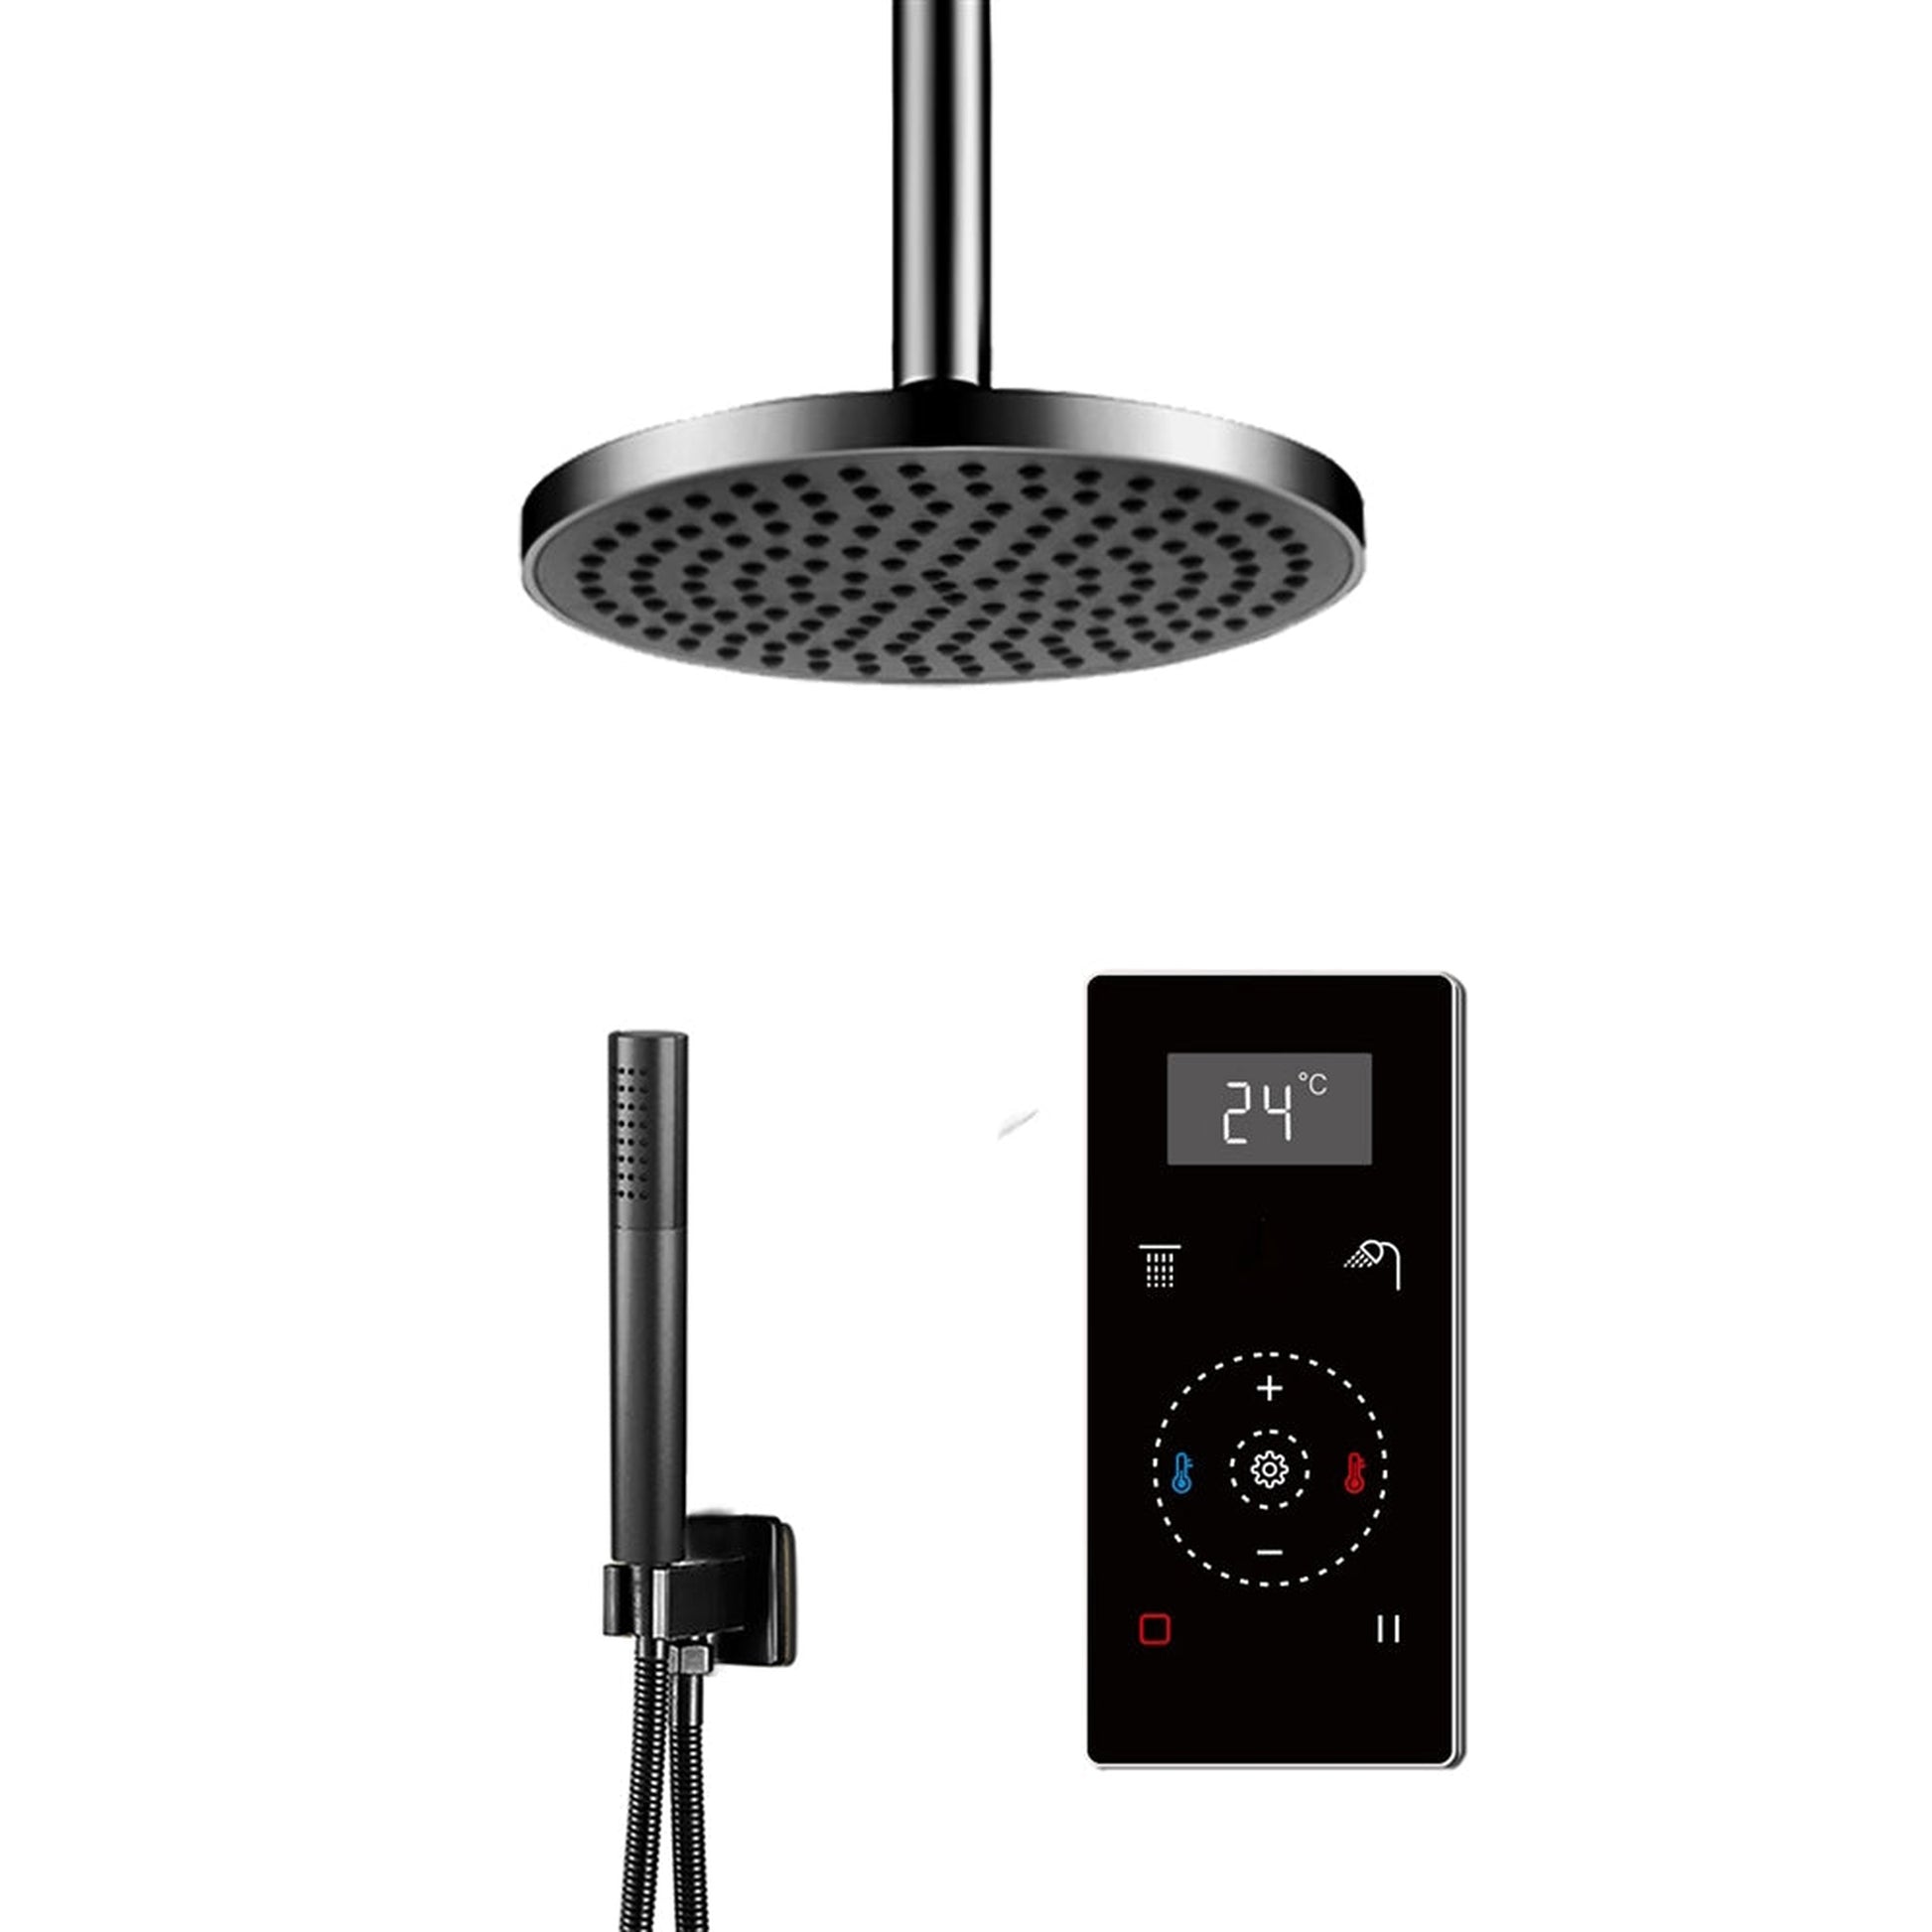 Fontana 12" Matte Black Ceiling Mounted Digital Thermostatic Shower With Black Digital Touch Screen Shower Mixer Display Rainfall Shower Set With Hand Shower